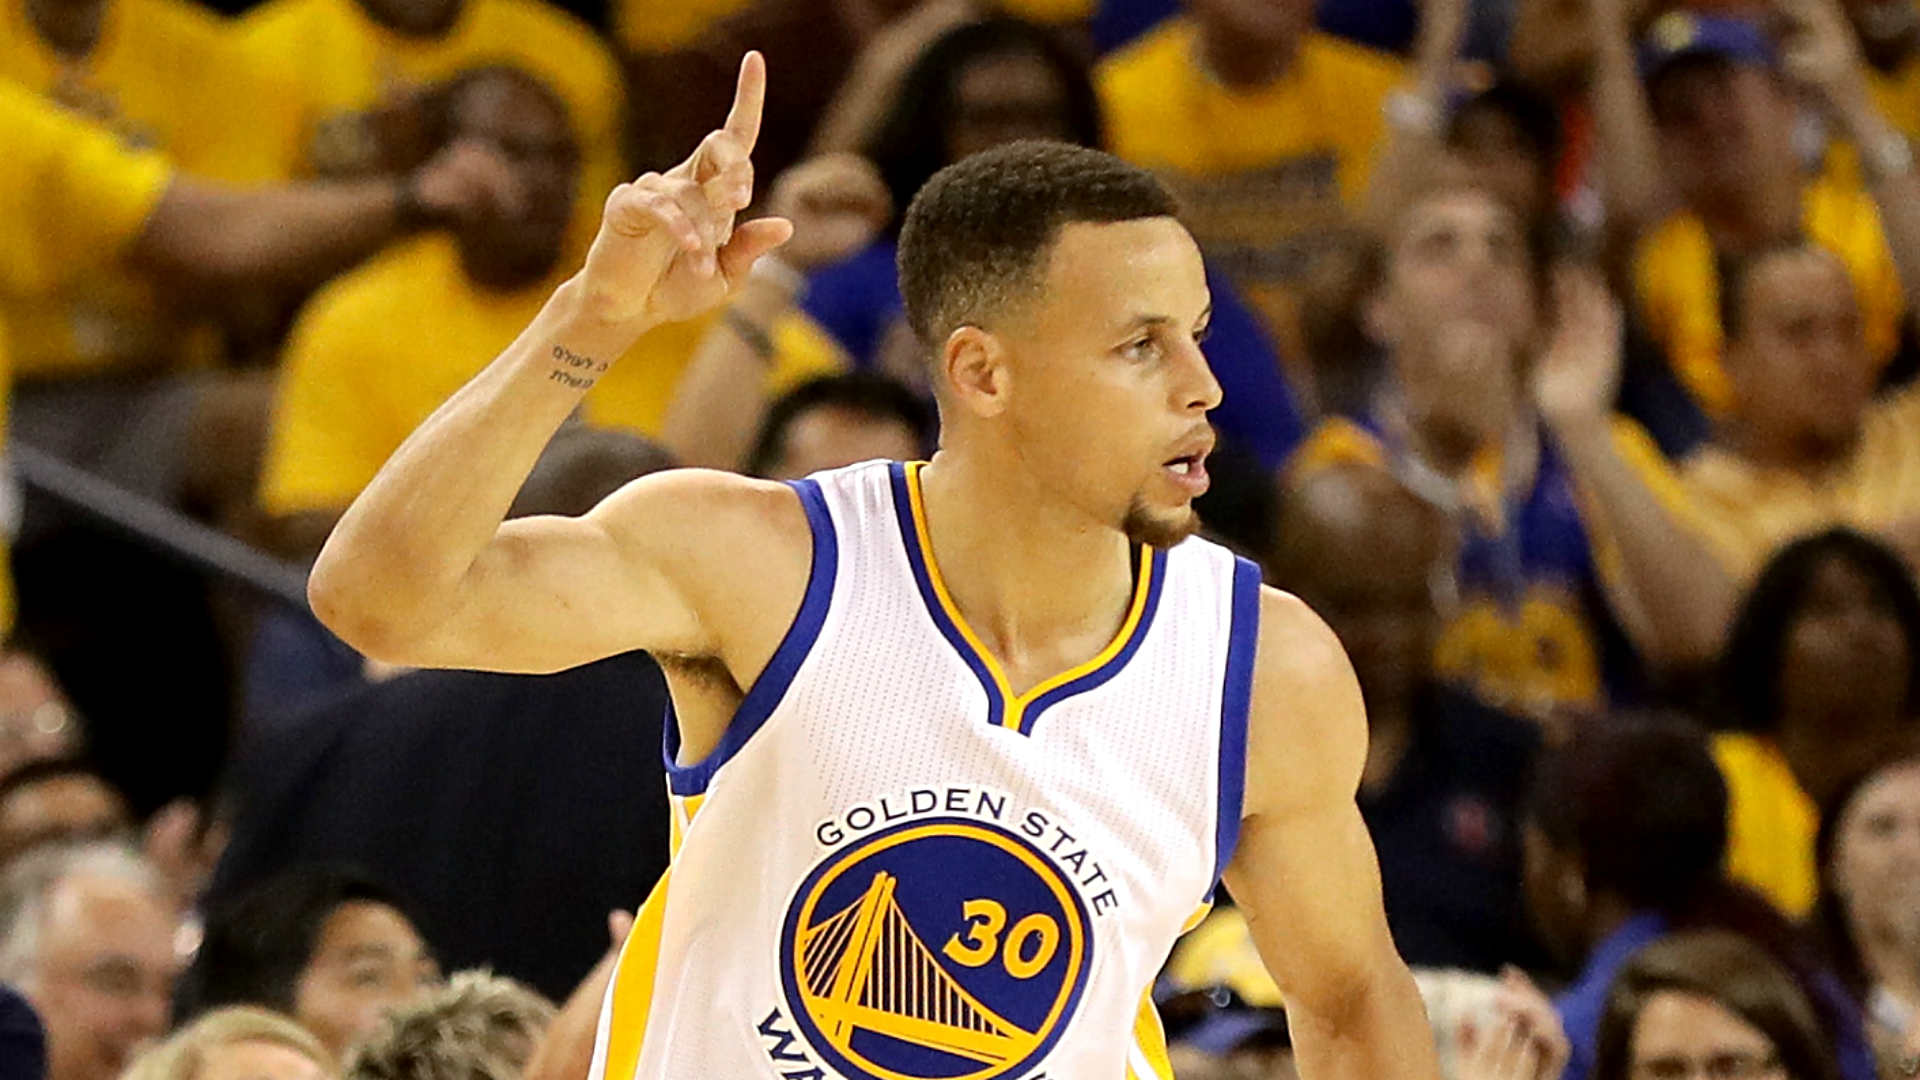 Basketball Stephen Curry names team he hopes to play for in 2017